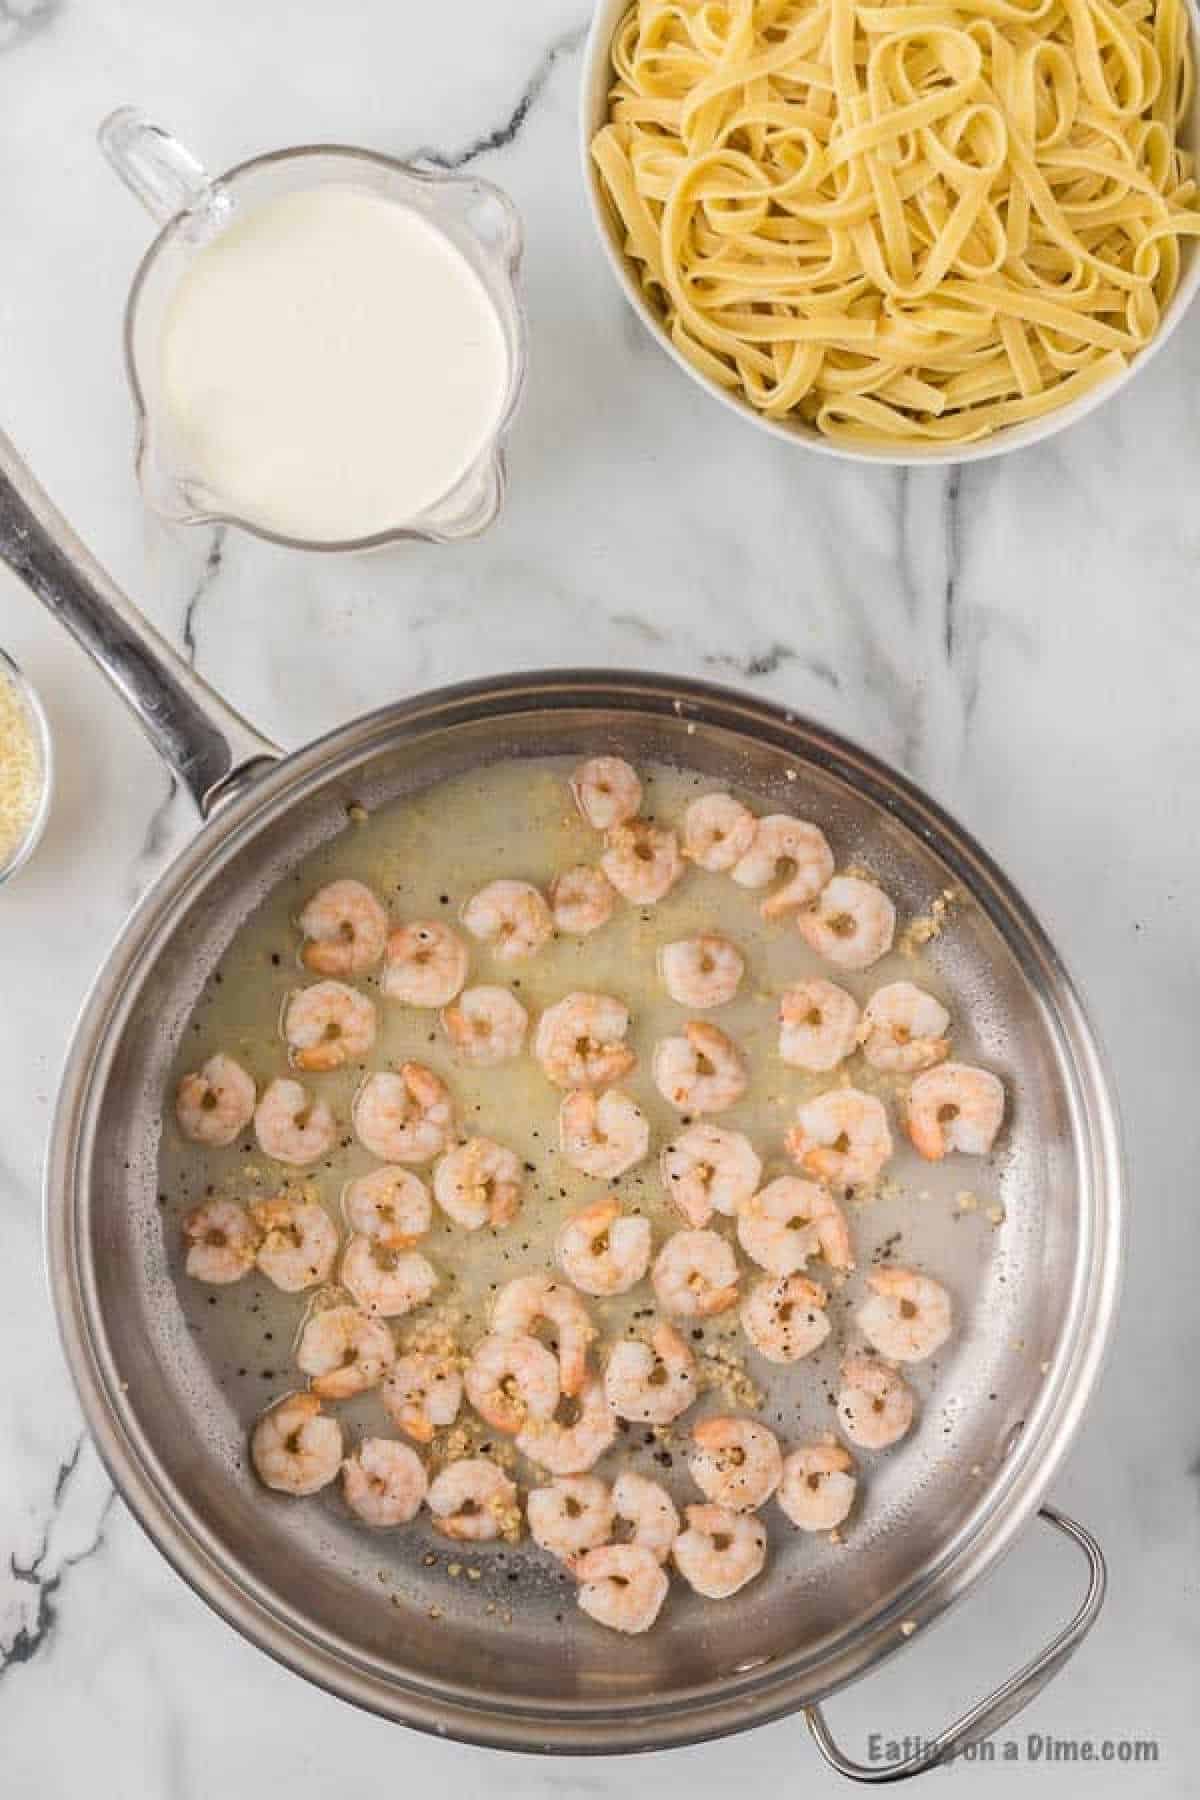 Cooking shrimp in a large skillet in a buttery sauce with seasoning. A bowl of fettuccini noodles and cream on the side